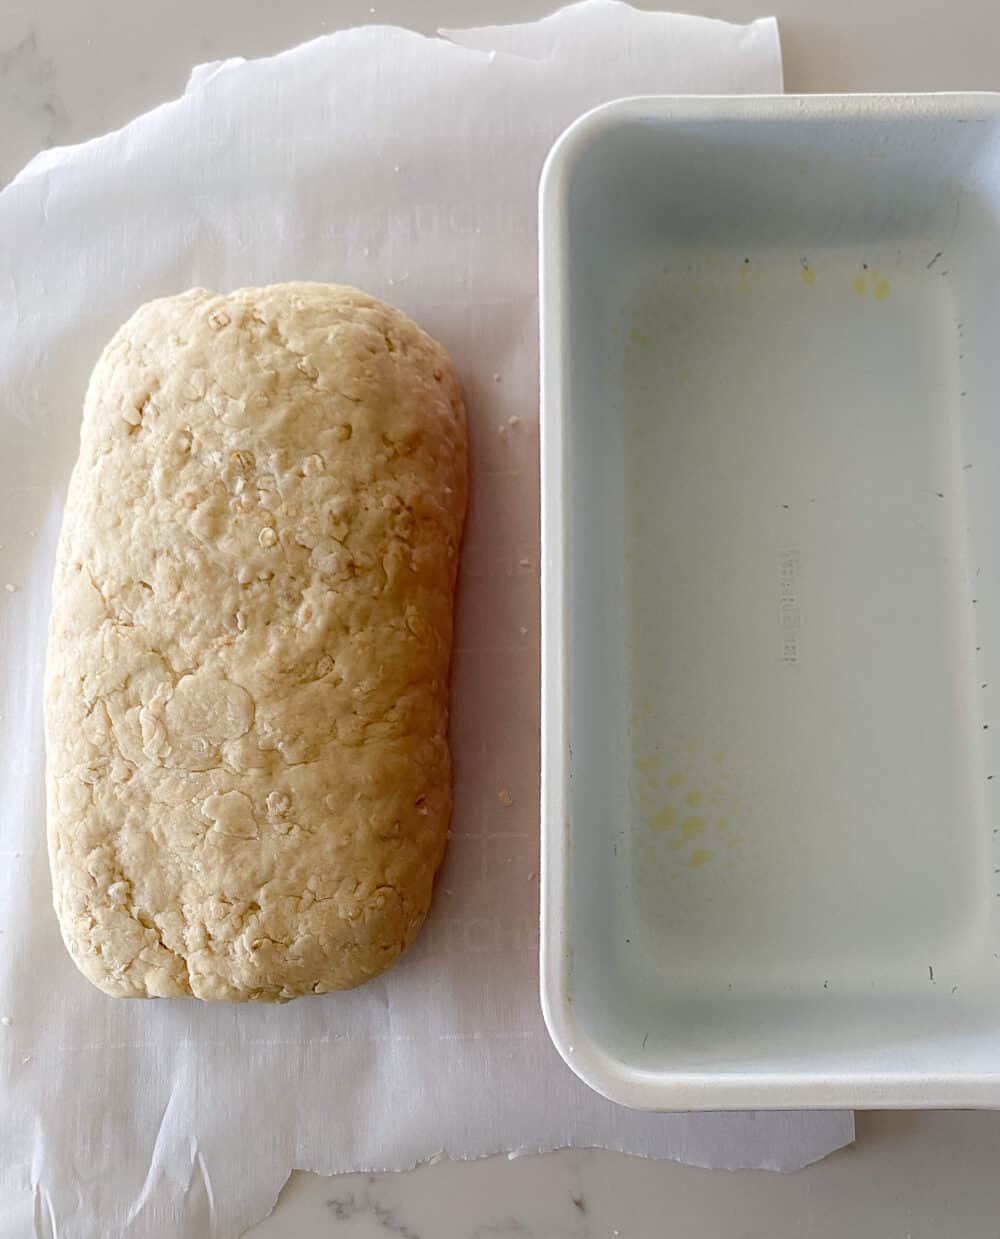 kneading bread dough on parchment paper